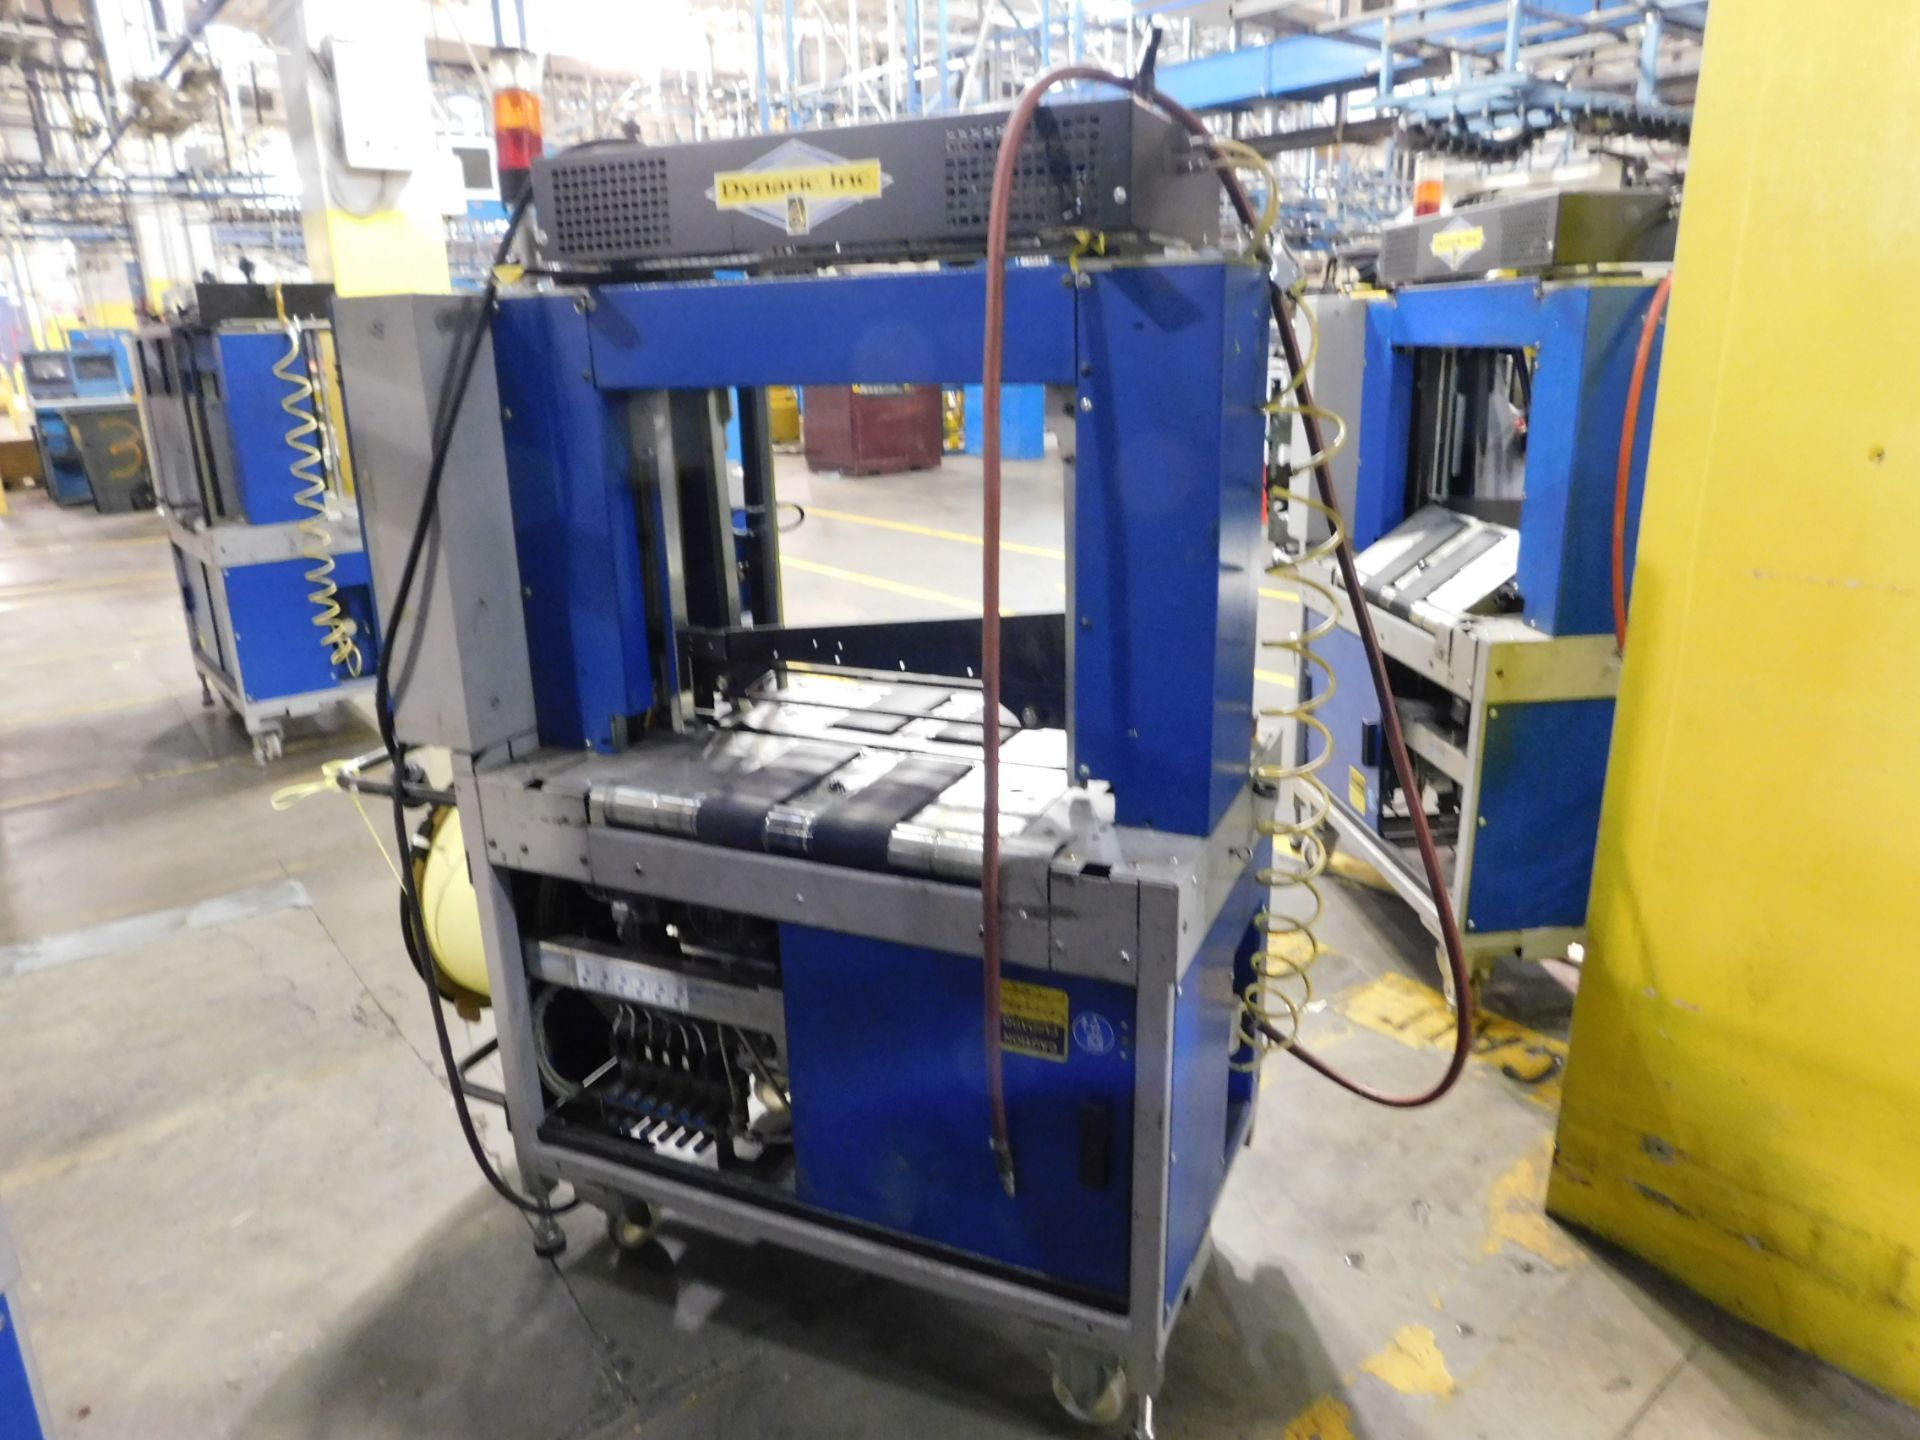 Dynark banding machine with discharge roller conveyor, 5 ft. long by 18 in. wide, mobile, asset # - Image 2 of 3